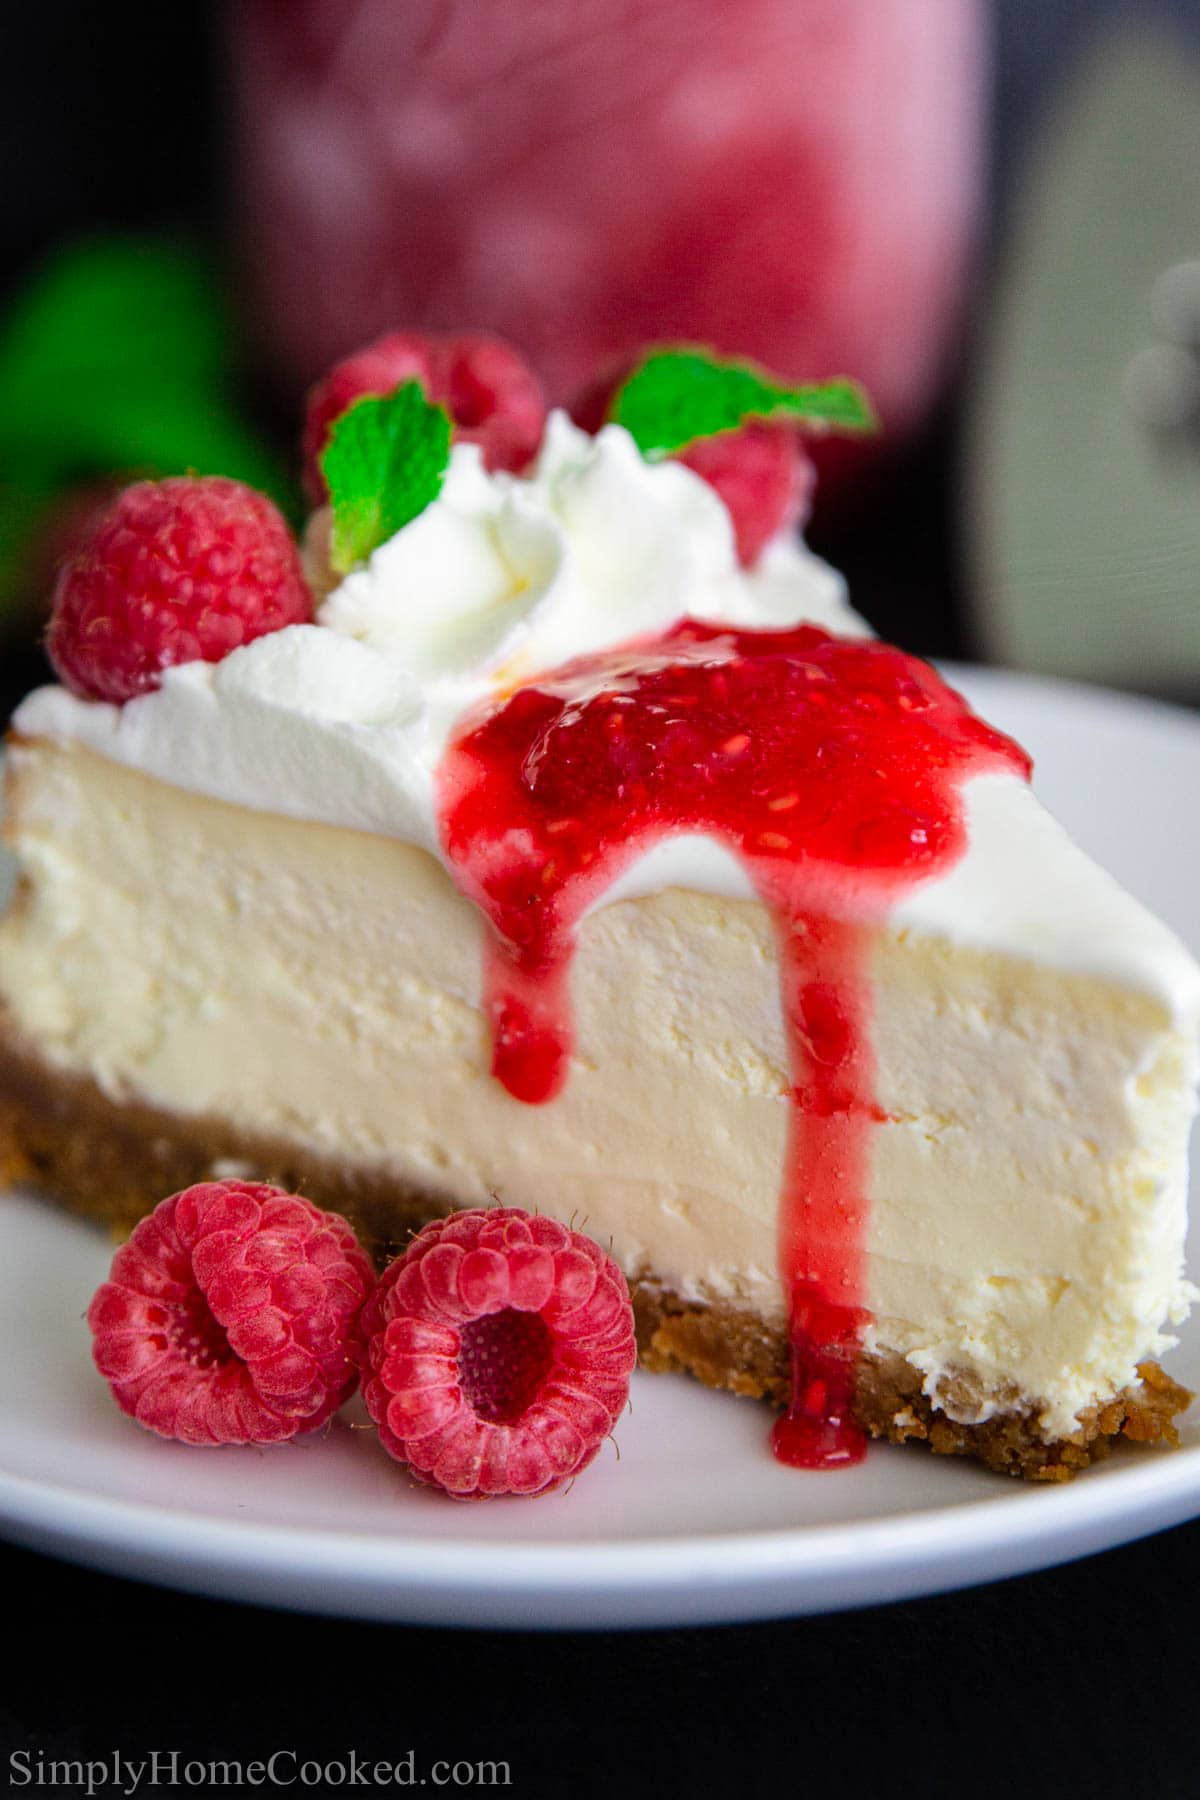 A slice of New York style cheesecake on a white plate with raspberry sauce dripping over.